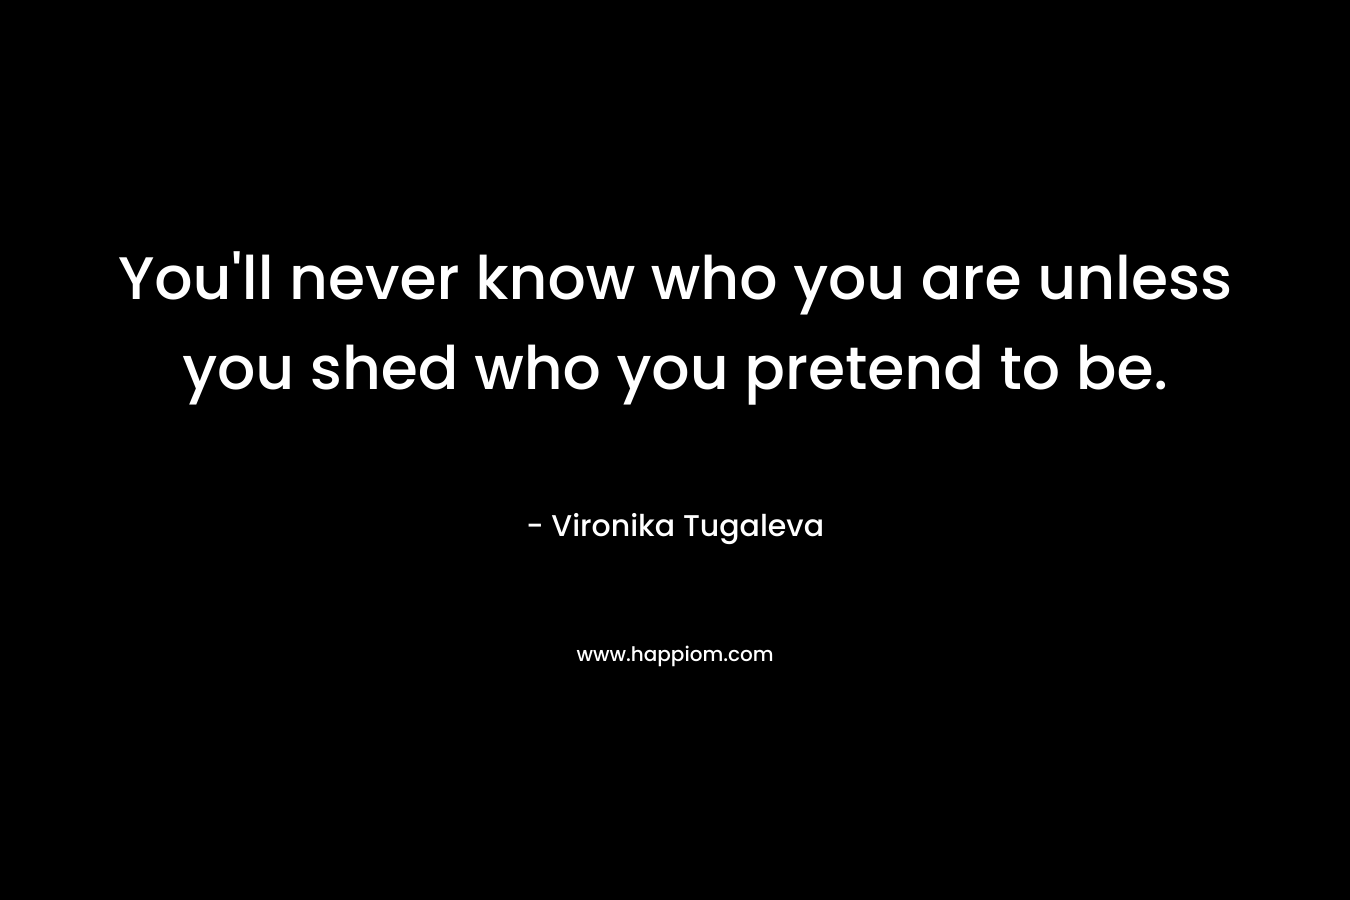 You'll never know who you are unless you shed who you pretend to be.